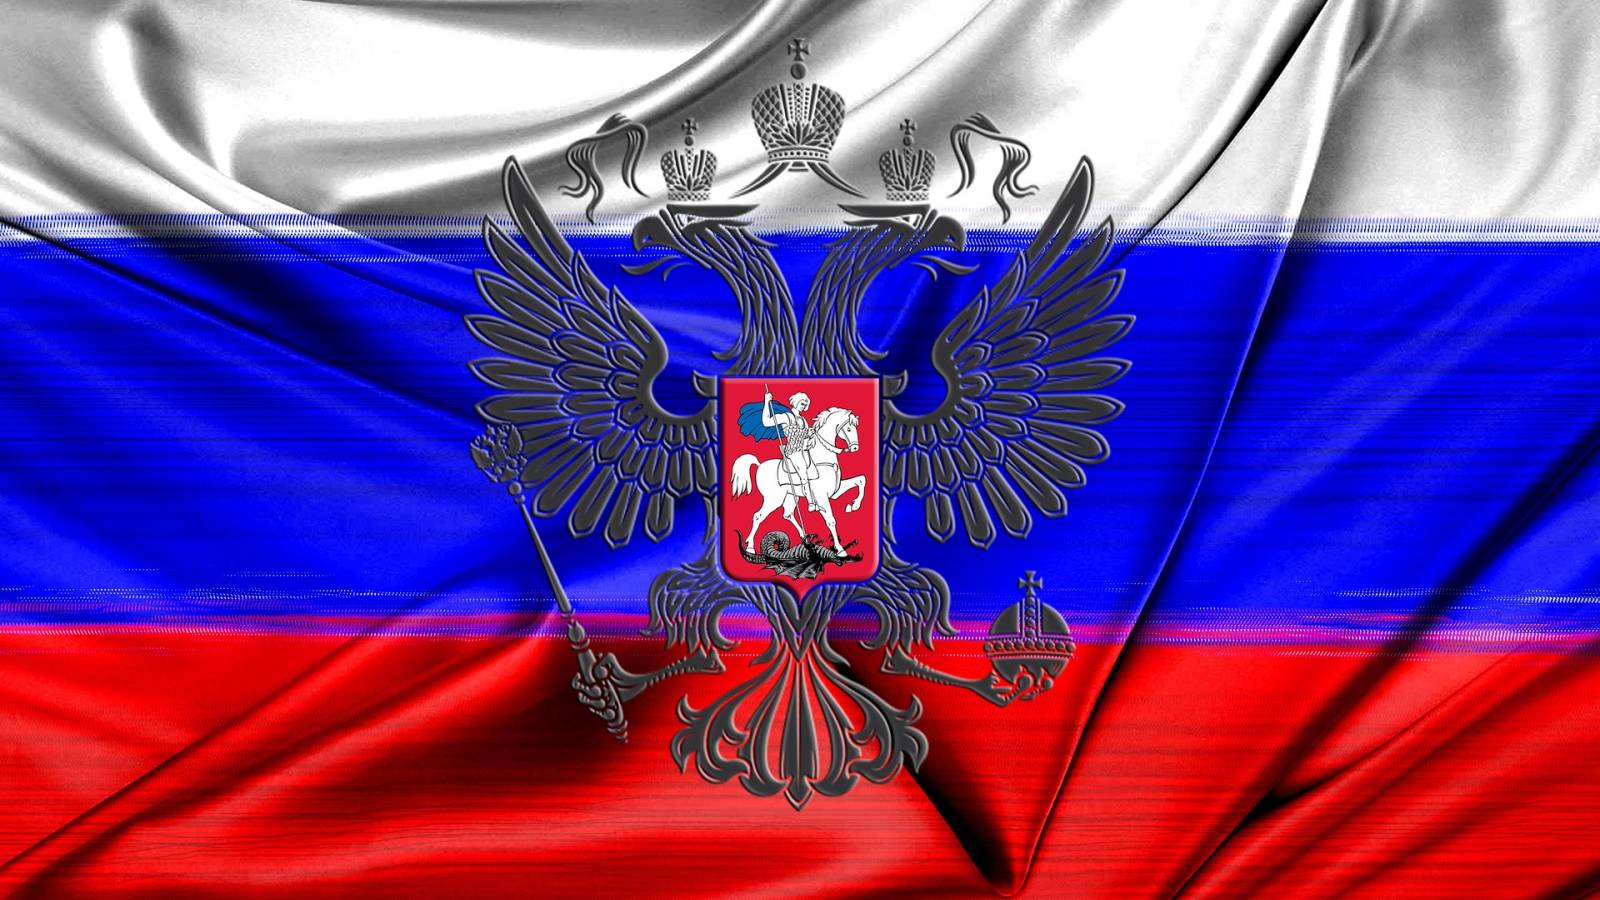 Russia Conquered New Territories Ukraine The Major Objective Imposed on Moscow